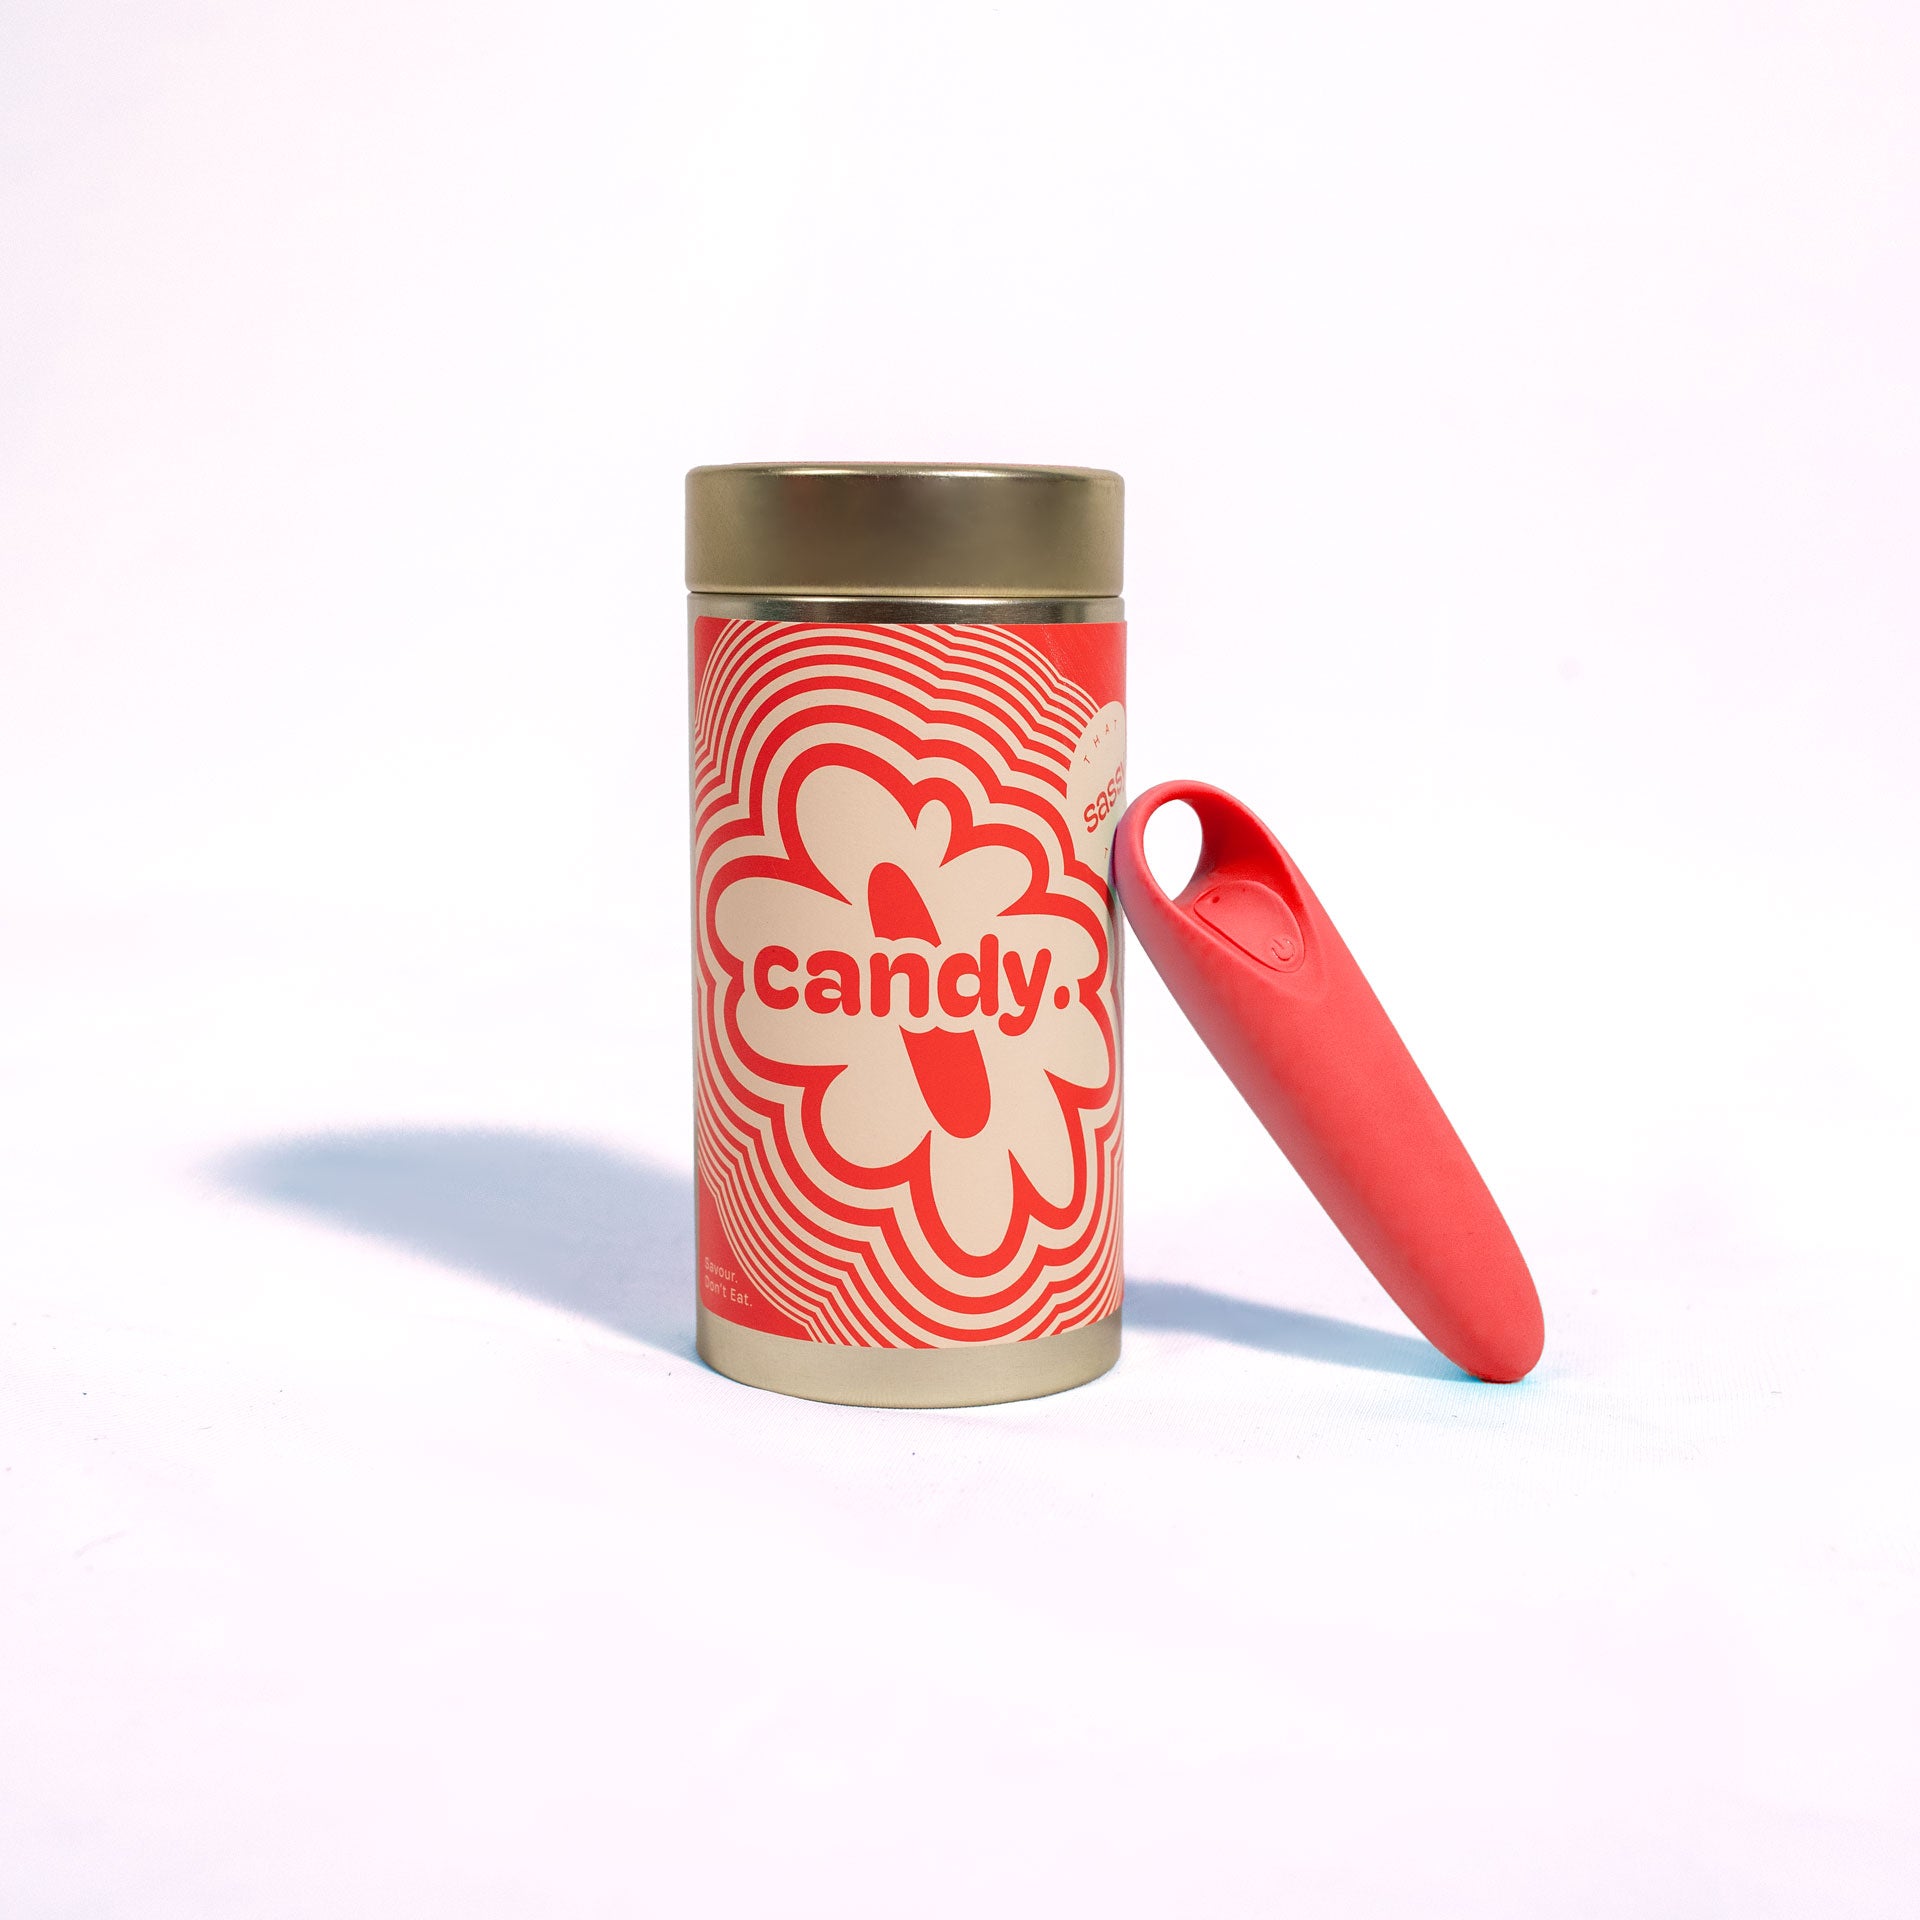 Retro Red Candy Personal Massager Displayed Beside Packaging